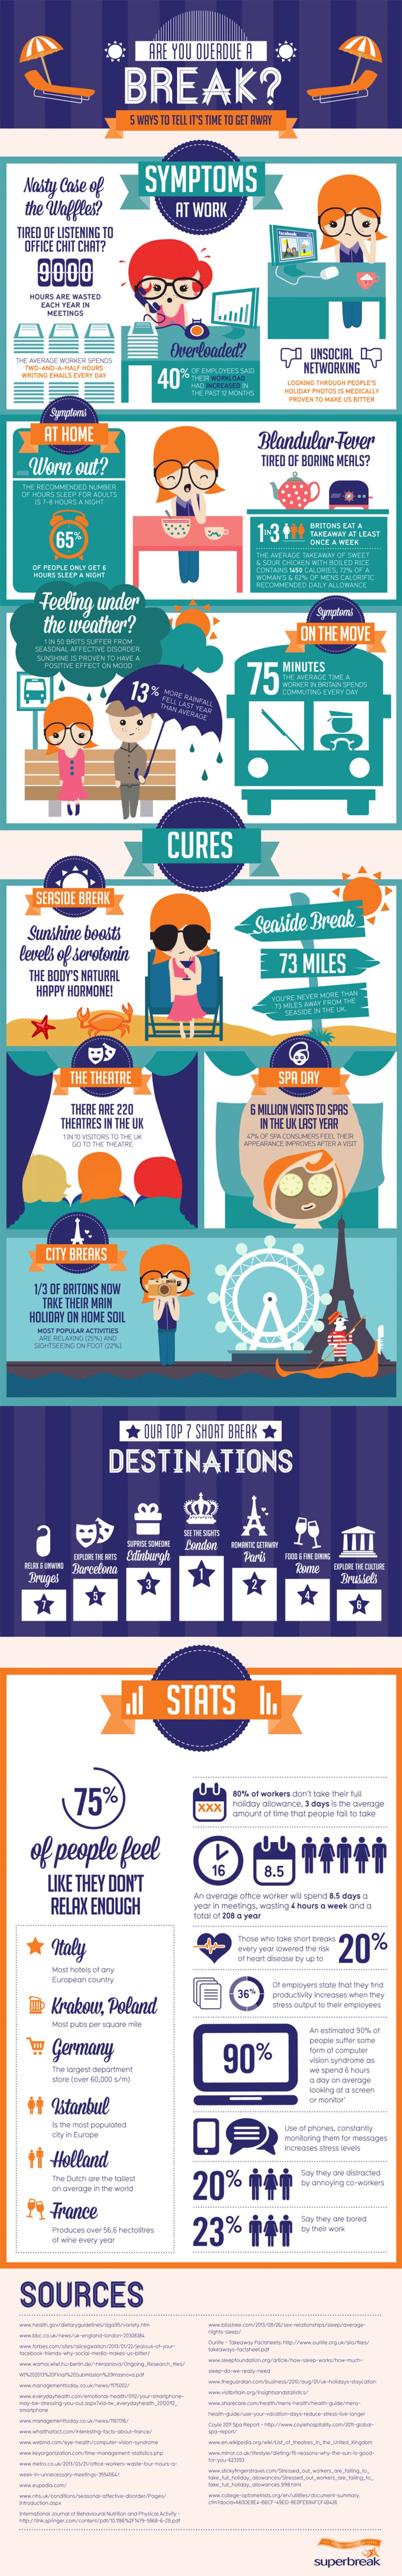 Is It Time For a Vacation? This Infographic Says It Is